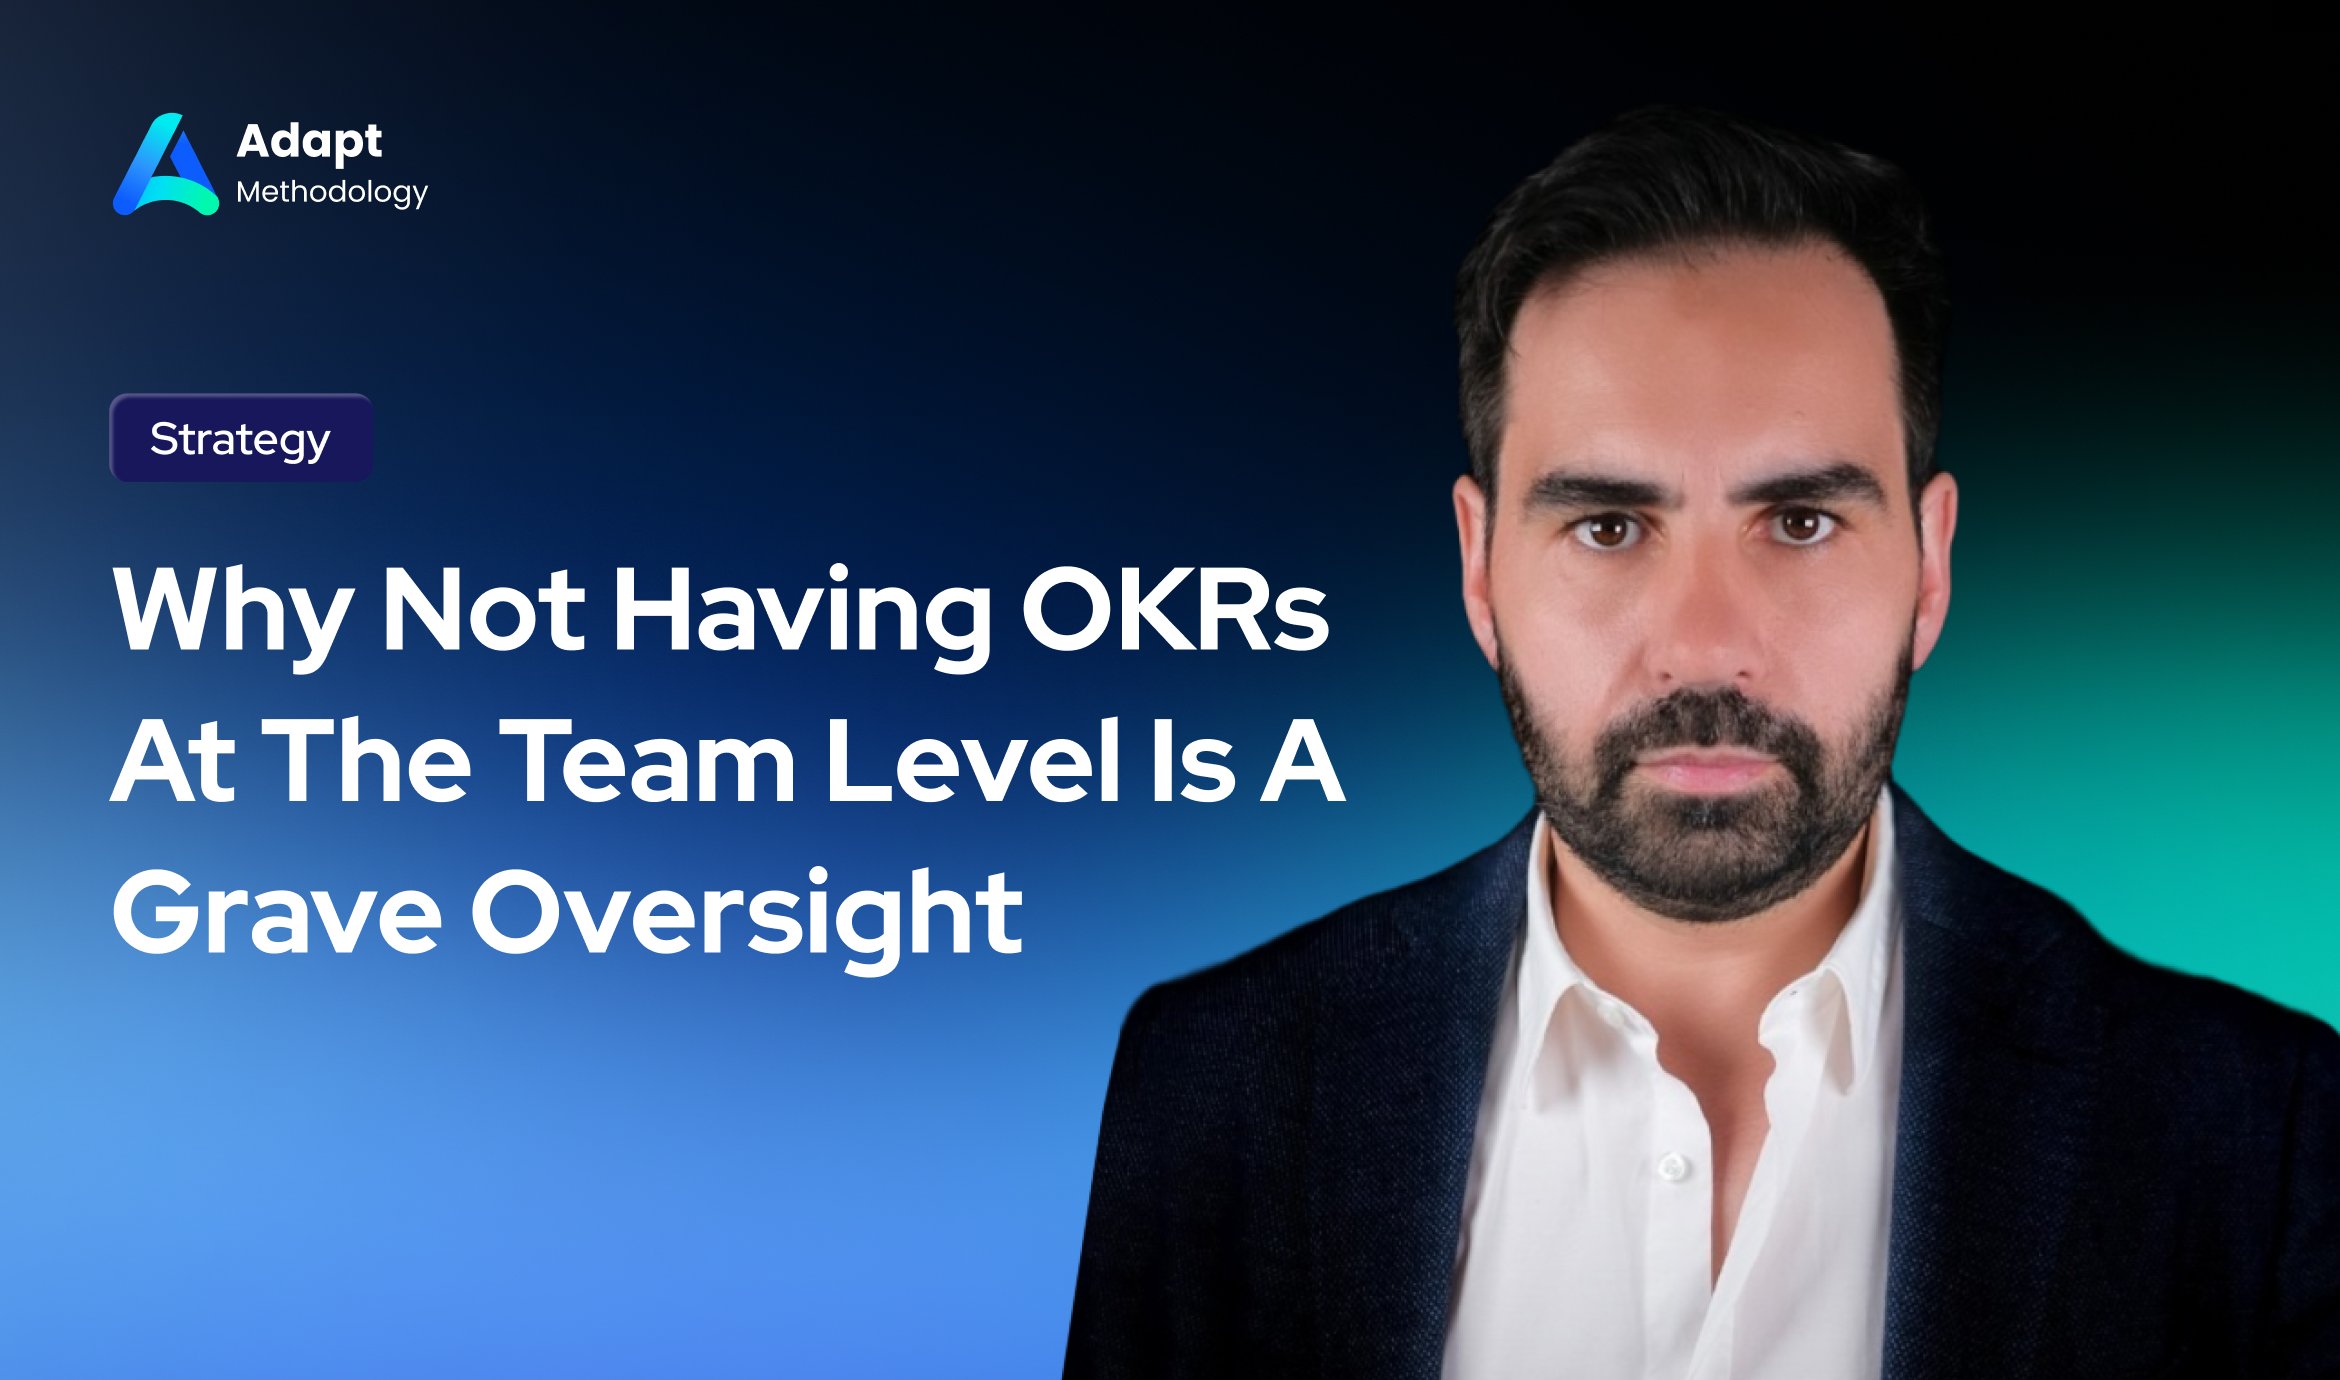 Why Not Having OKRs At The Team Level Is A Grave Oversight